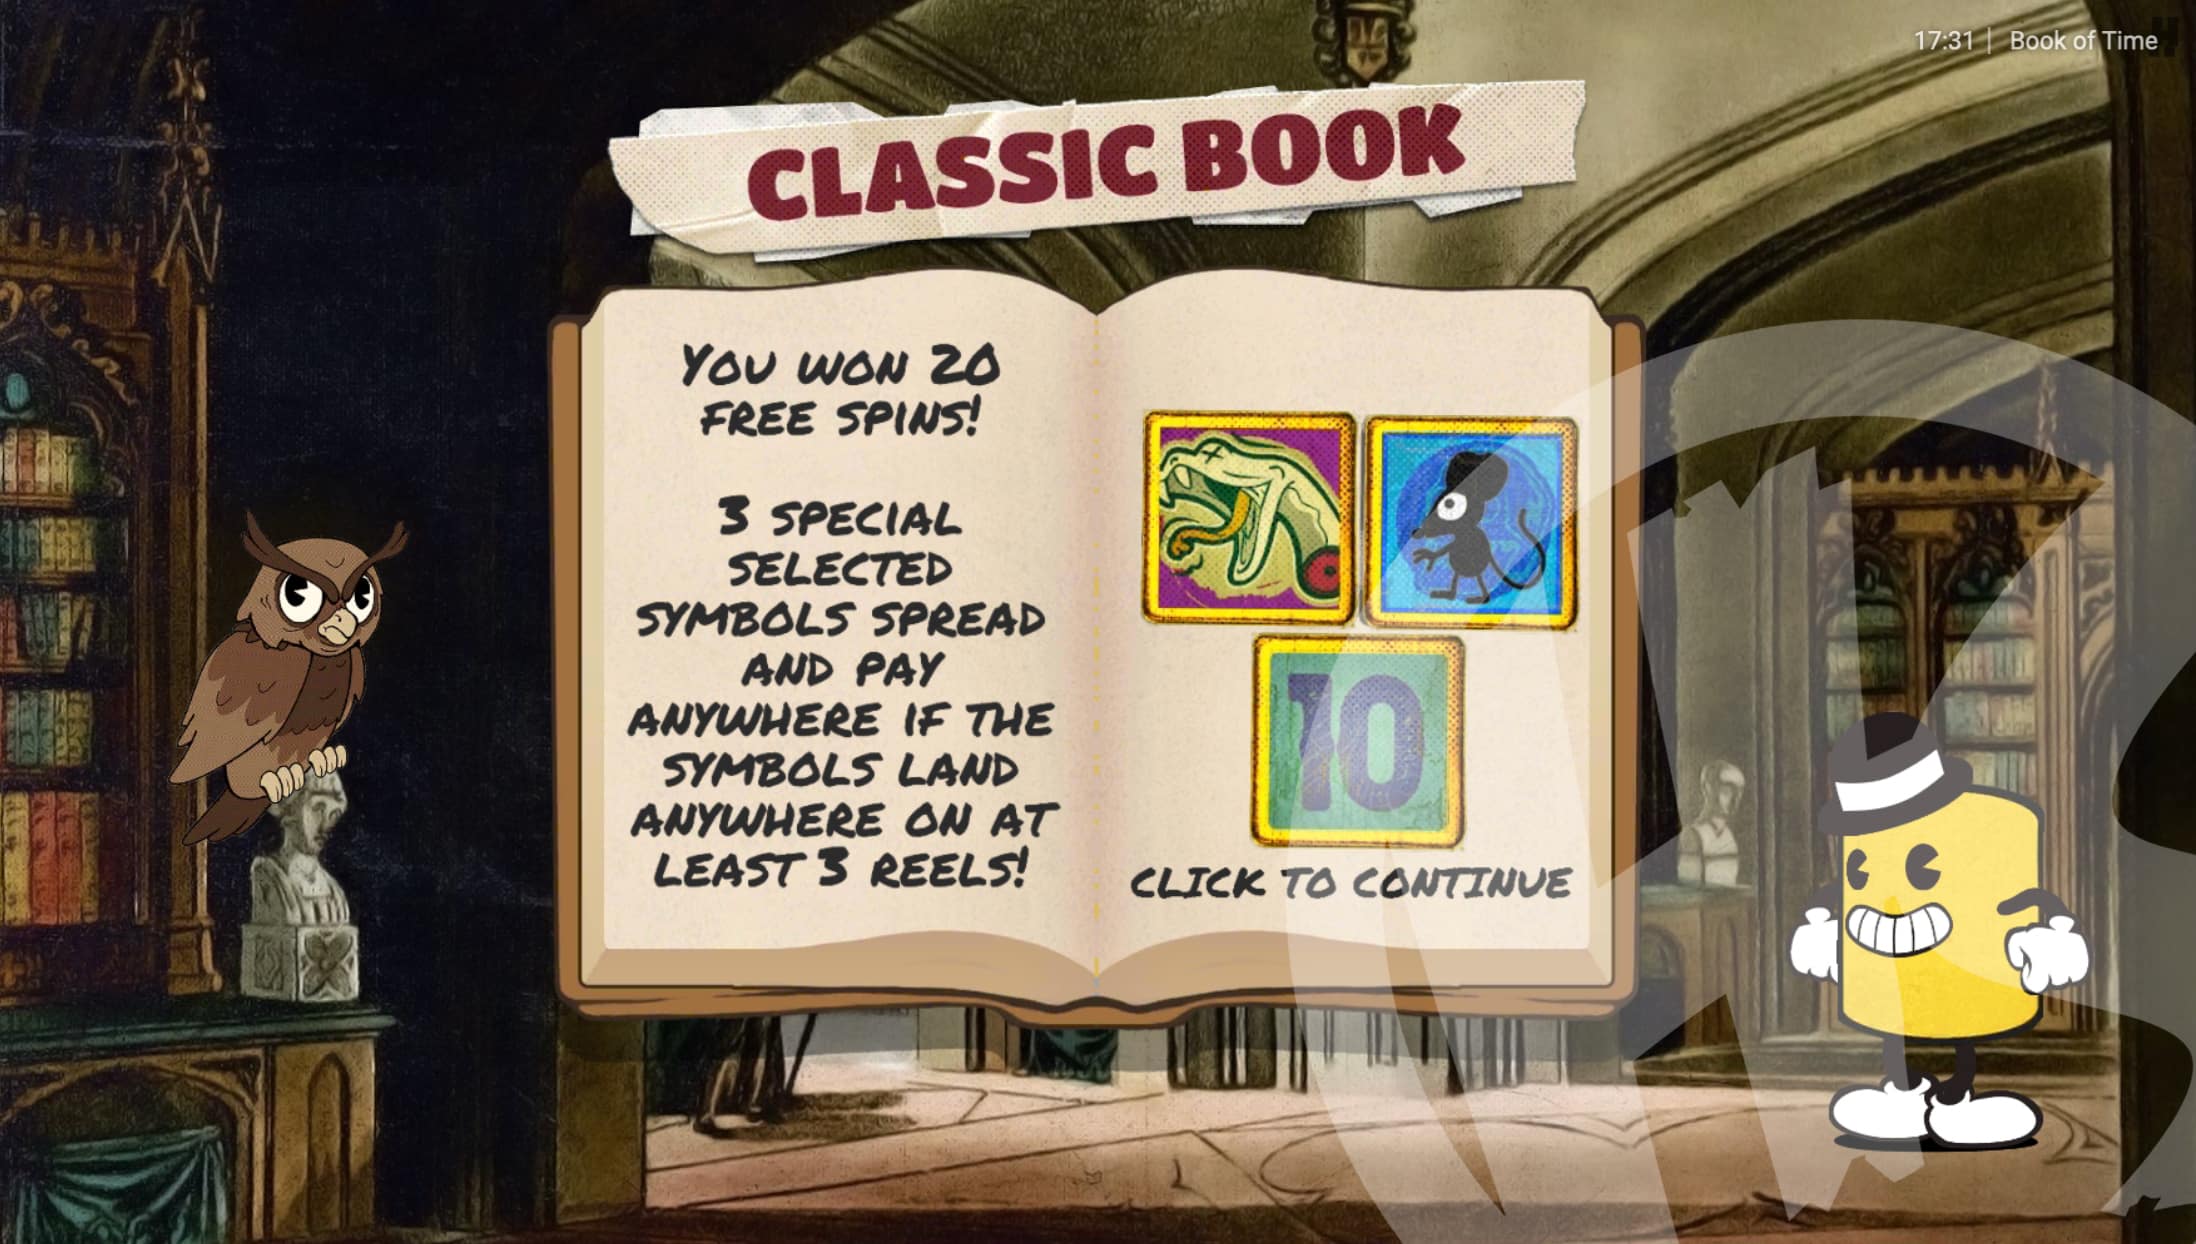 Land 3, 4, or 5 Book Scatter Symbols to Unlock 1, 2, or 3 Special Symbols, Respectively